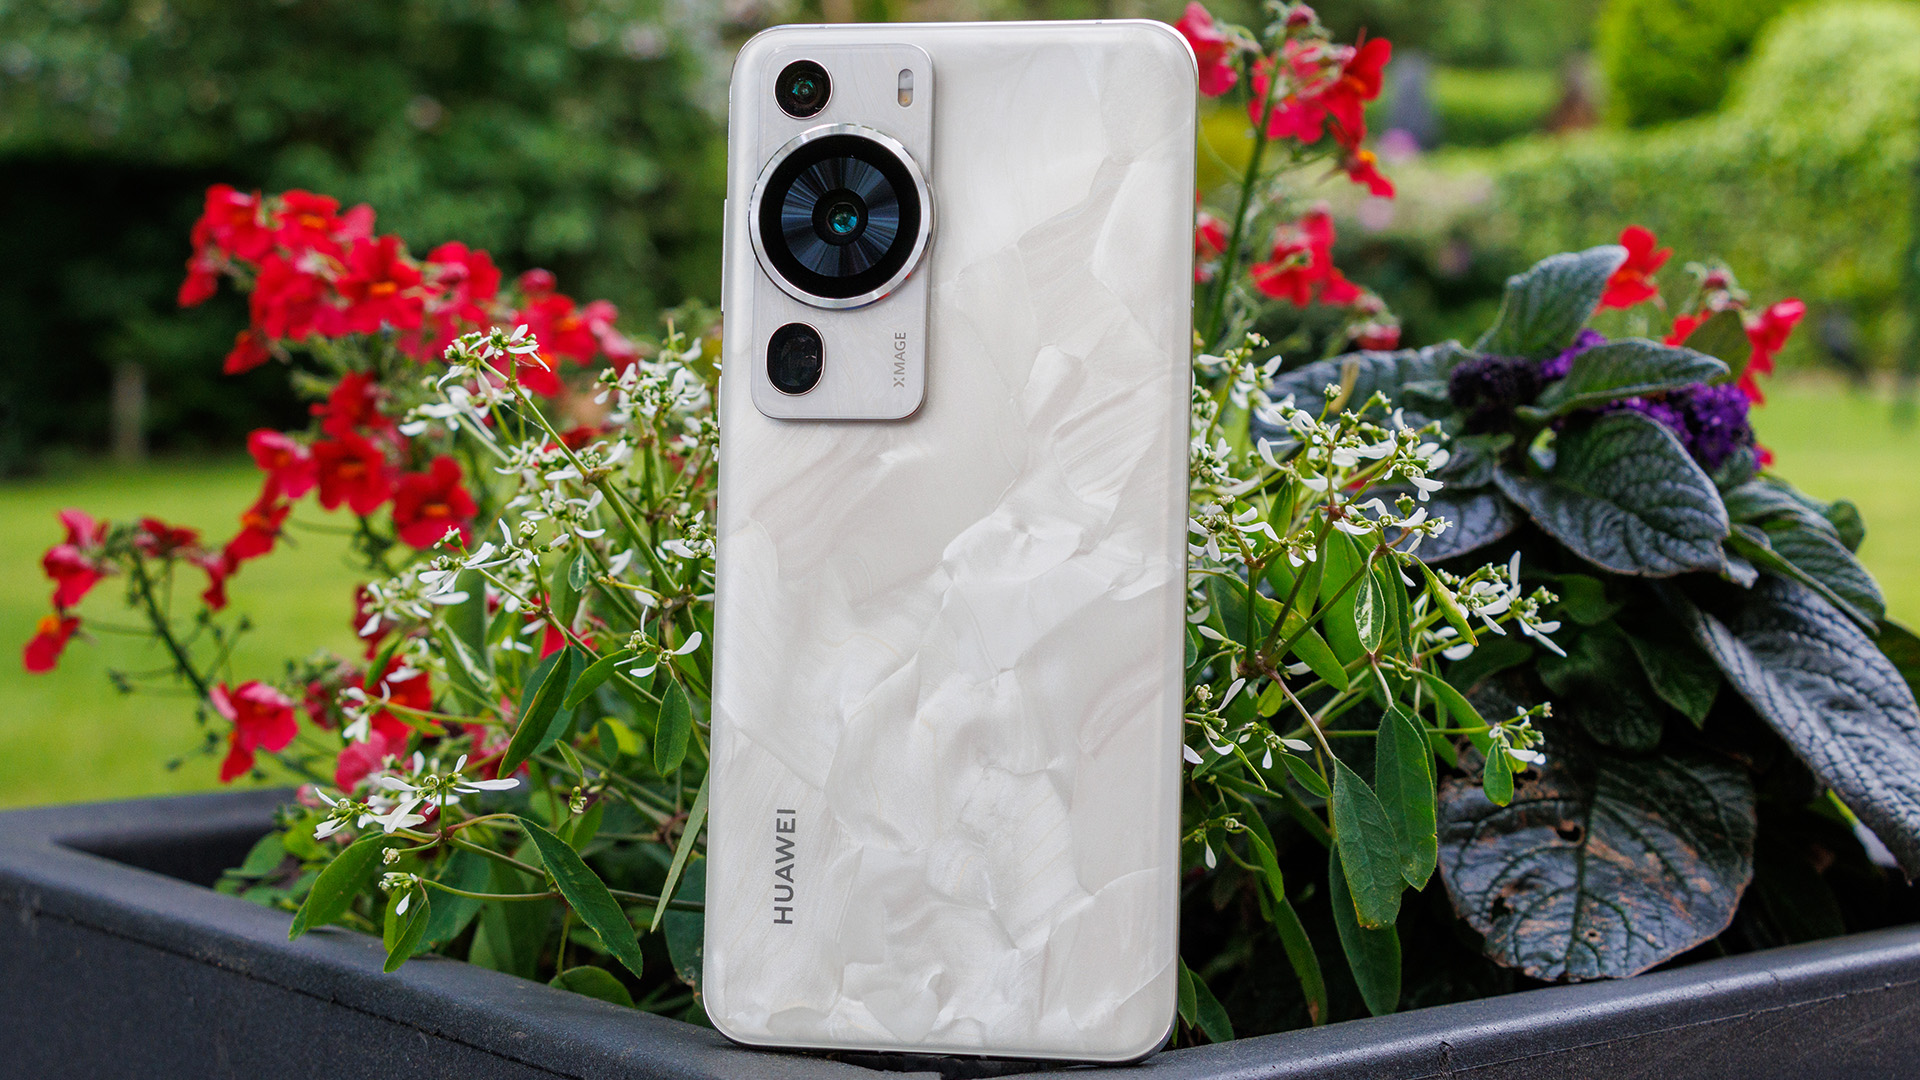 The Huawei P60 Pro to come with never before seen cameras